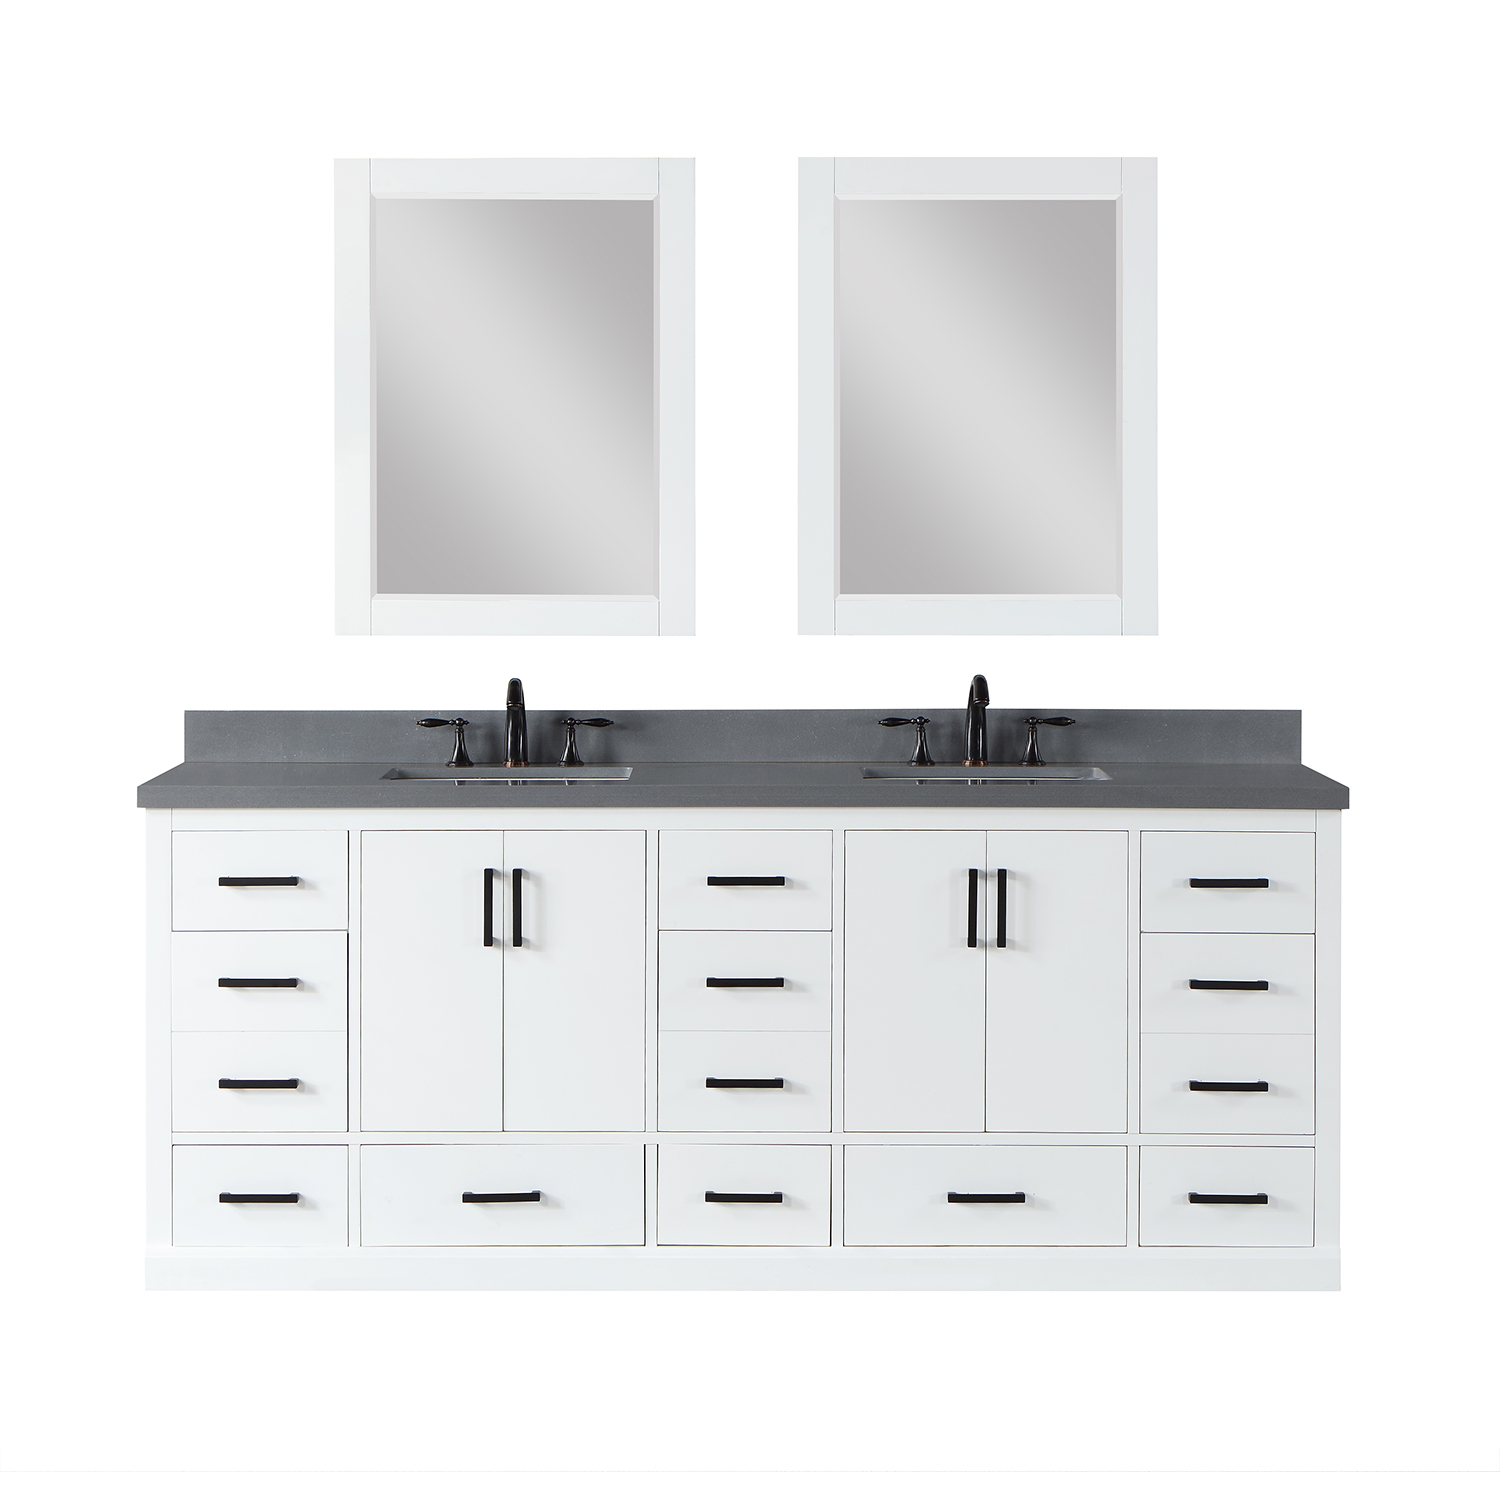 Issac Edwards Collection 84" Double Bathroom Vanity Set in White with Concrete Grey Composite Stone Countertop without Mirror 